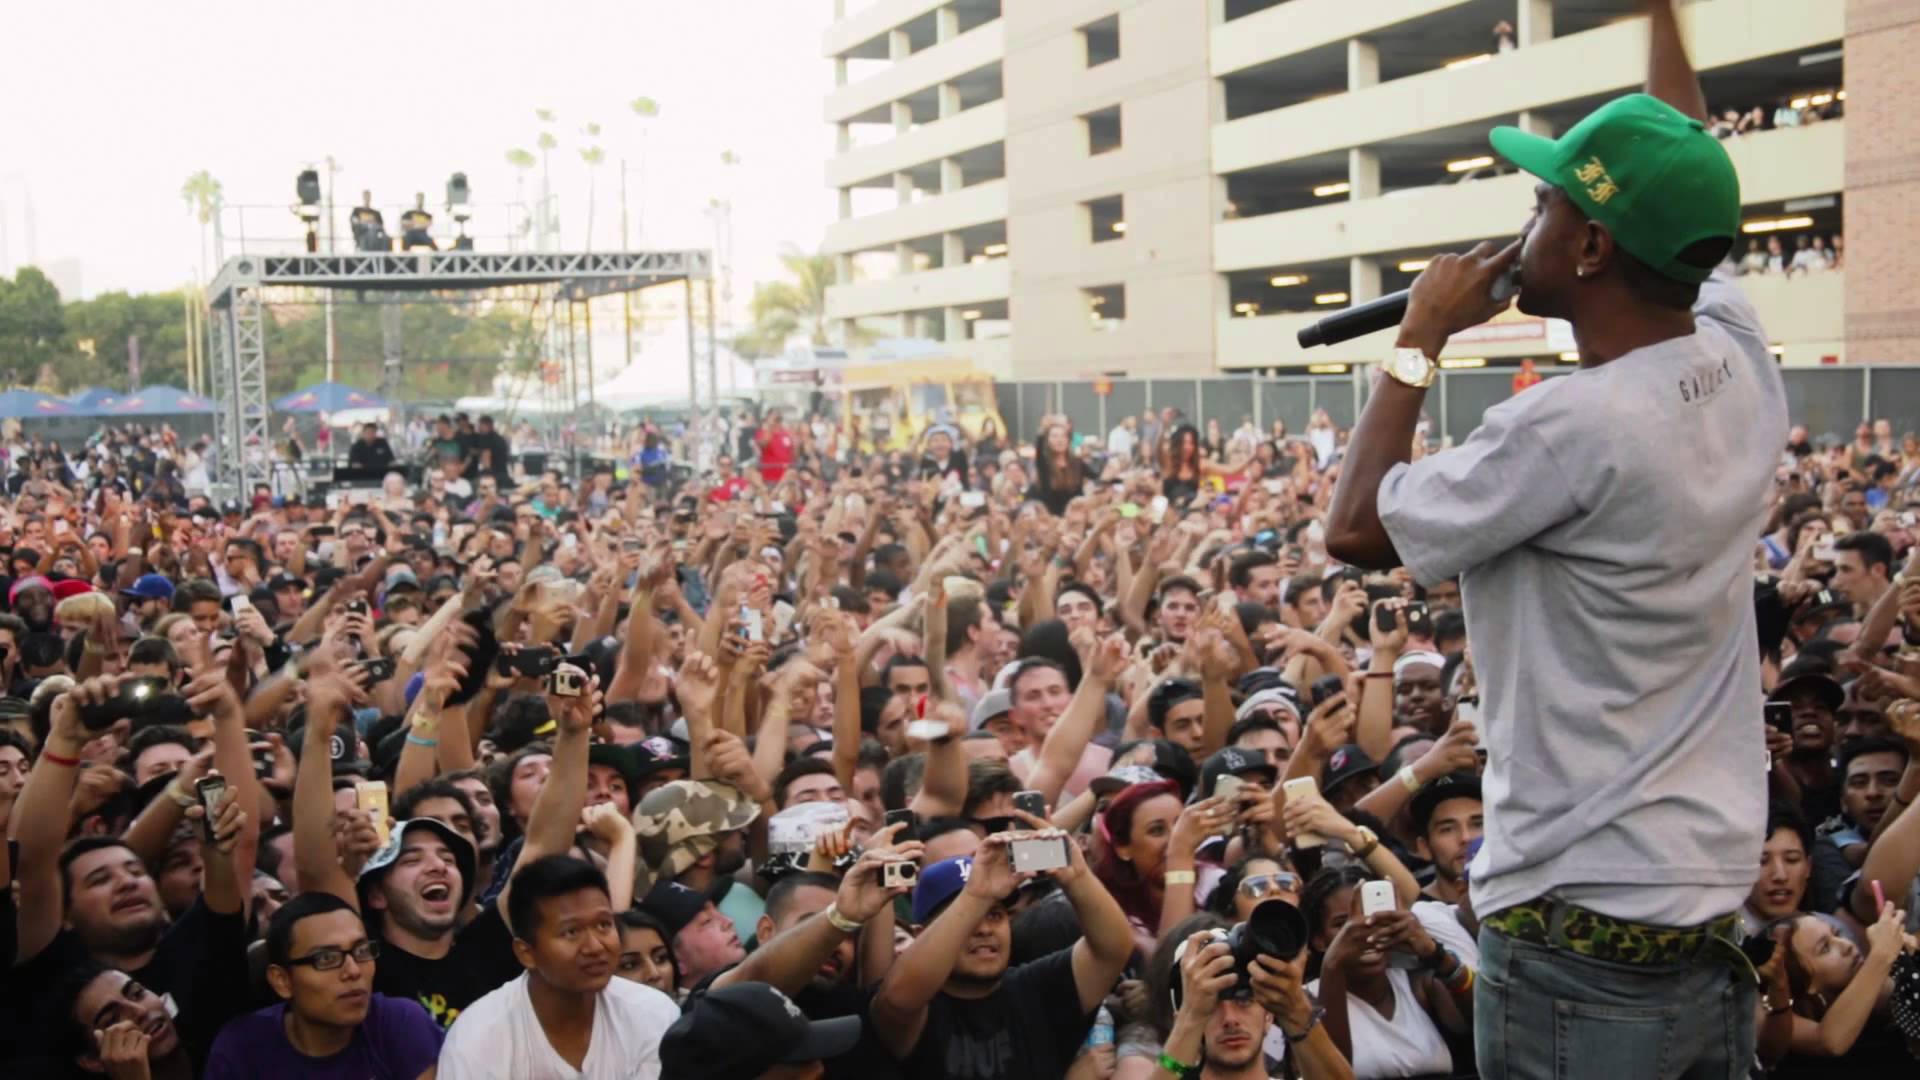 Fool's Gold announces 2015 lineup, artists include Earl Sweatshirt, and Action Bronson